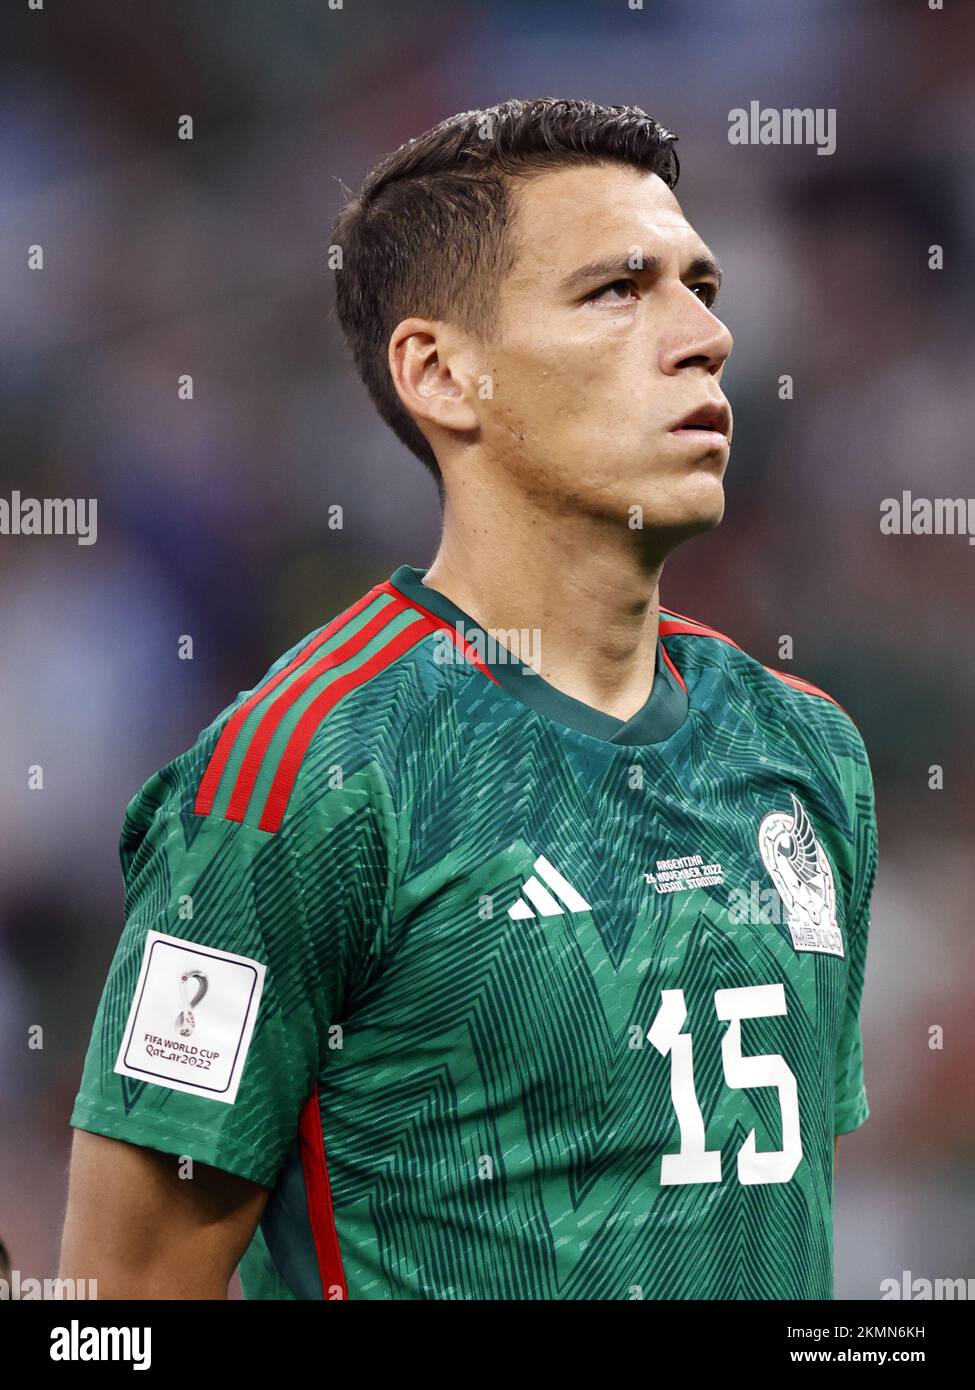 LUSAIL CITY - Hector Moreno of Mexico during the FIFA World Cup Qatar 2022 group C match between Argentina and Mexico at Lusail Stadium on November 26, 2022 in Lusail City, Qatar. AP | Dutch Height | MAURICE OF STONE Stock Photo